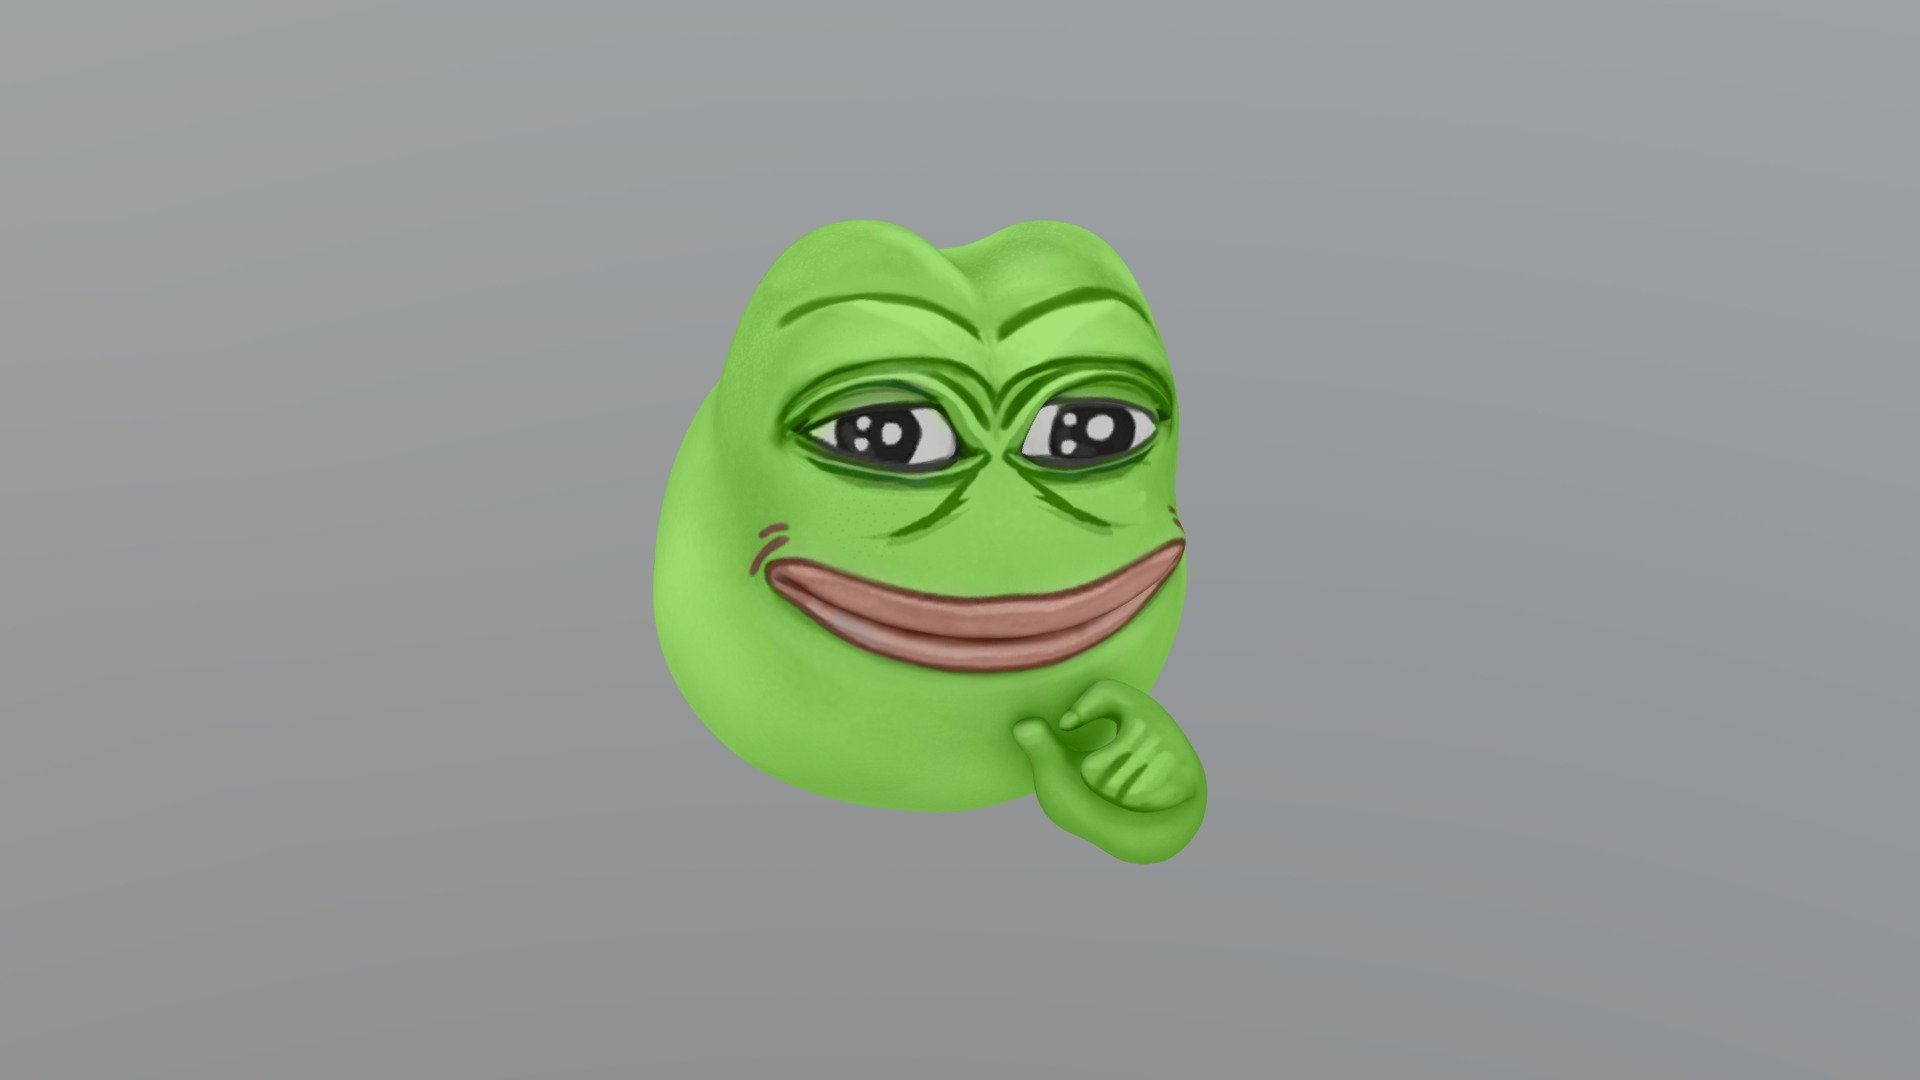 Pepe the Frog 3D model by Lufey (Lufey) [6c3c281